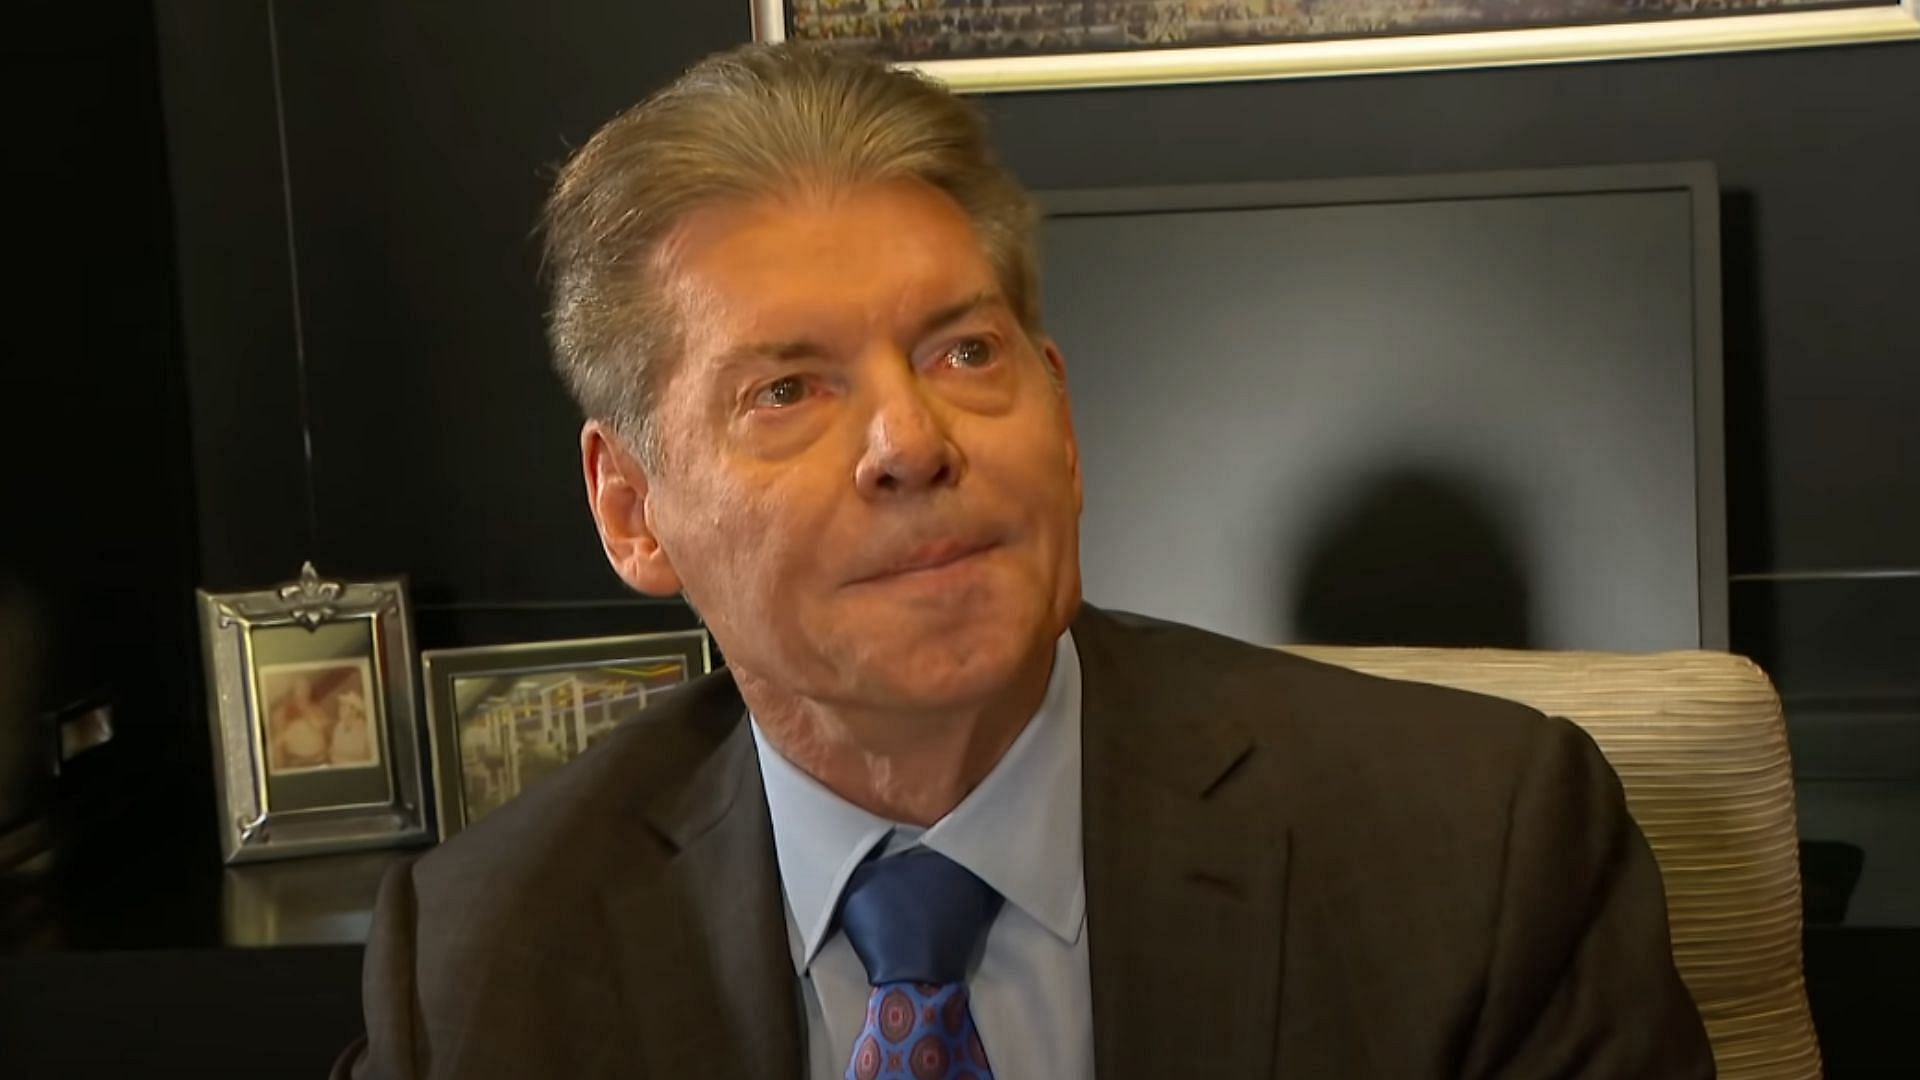 Vince McMahon booked WWE shows between 1982 and 2022